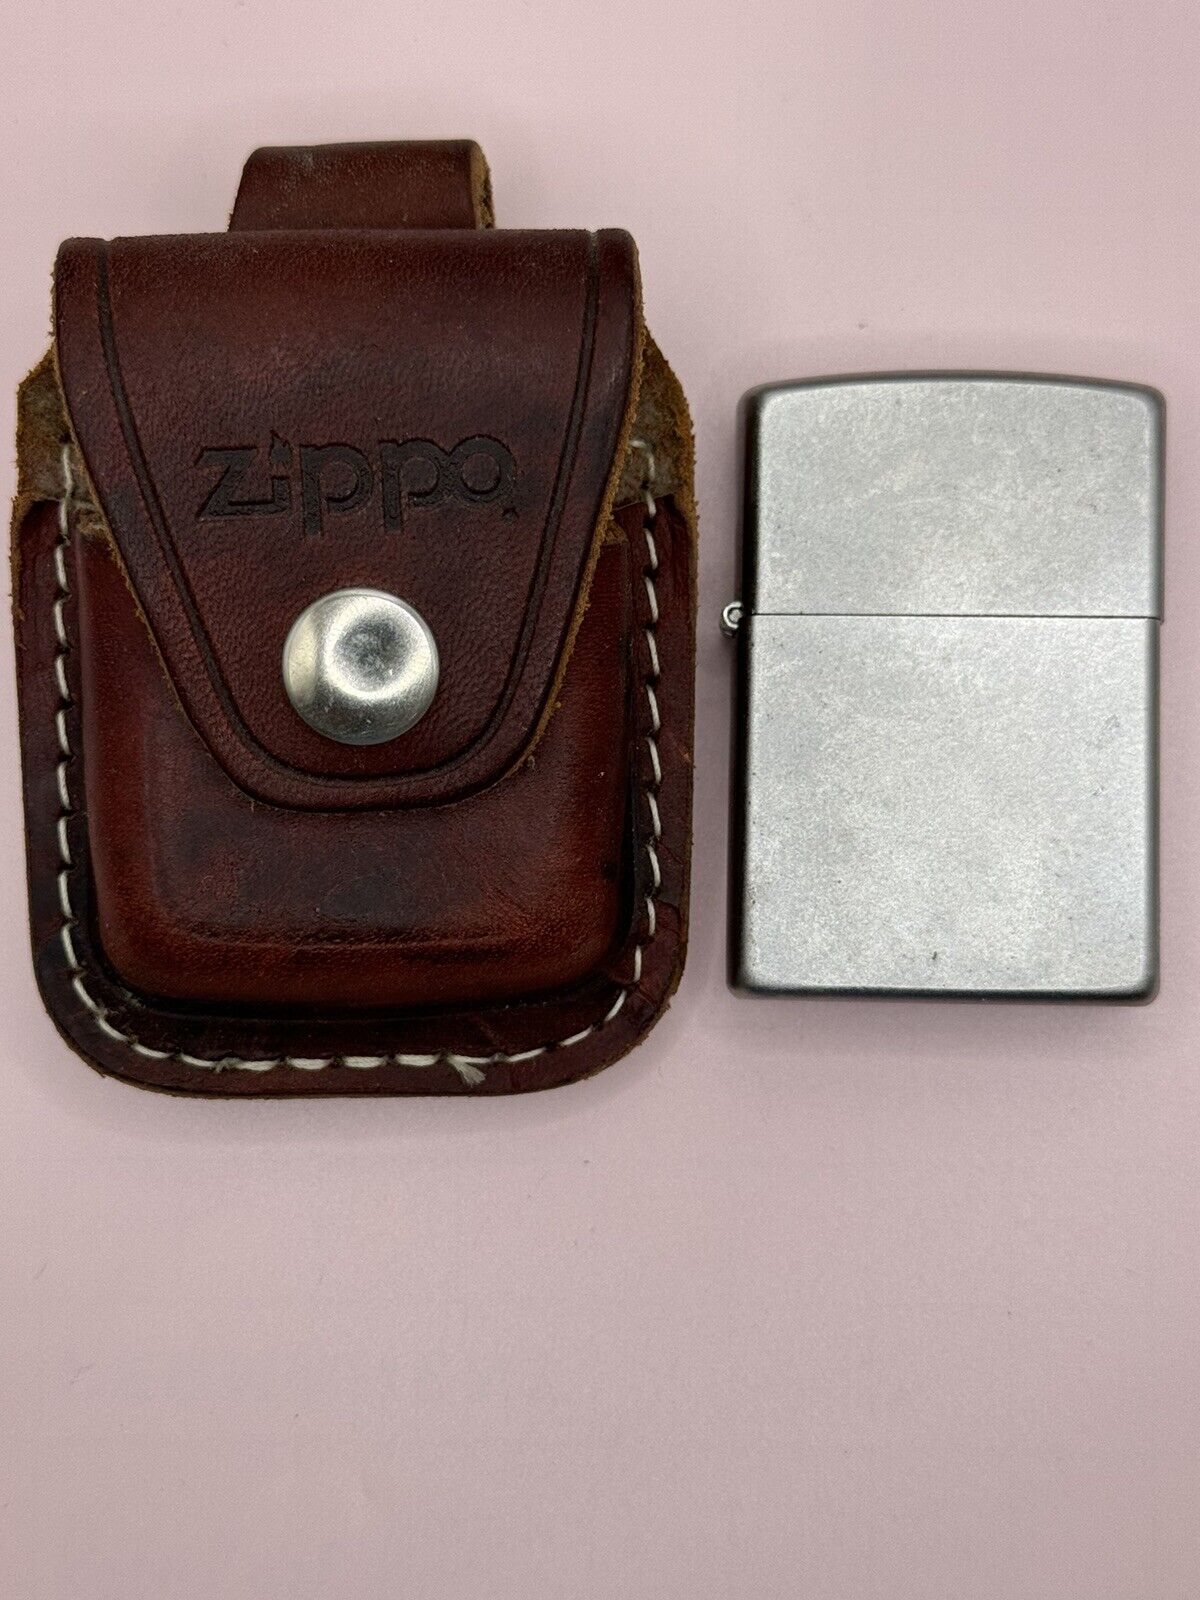 Vintage 2011 Chrome Zippo Lighter NEW & Brown Leather Zippo Pouch